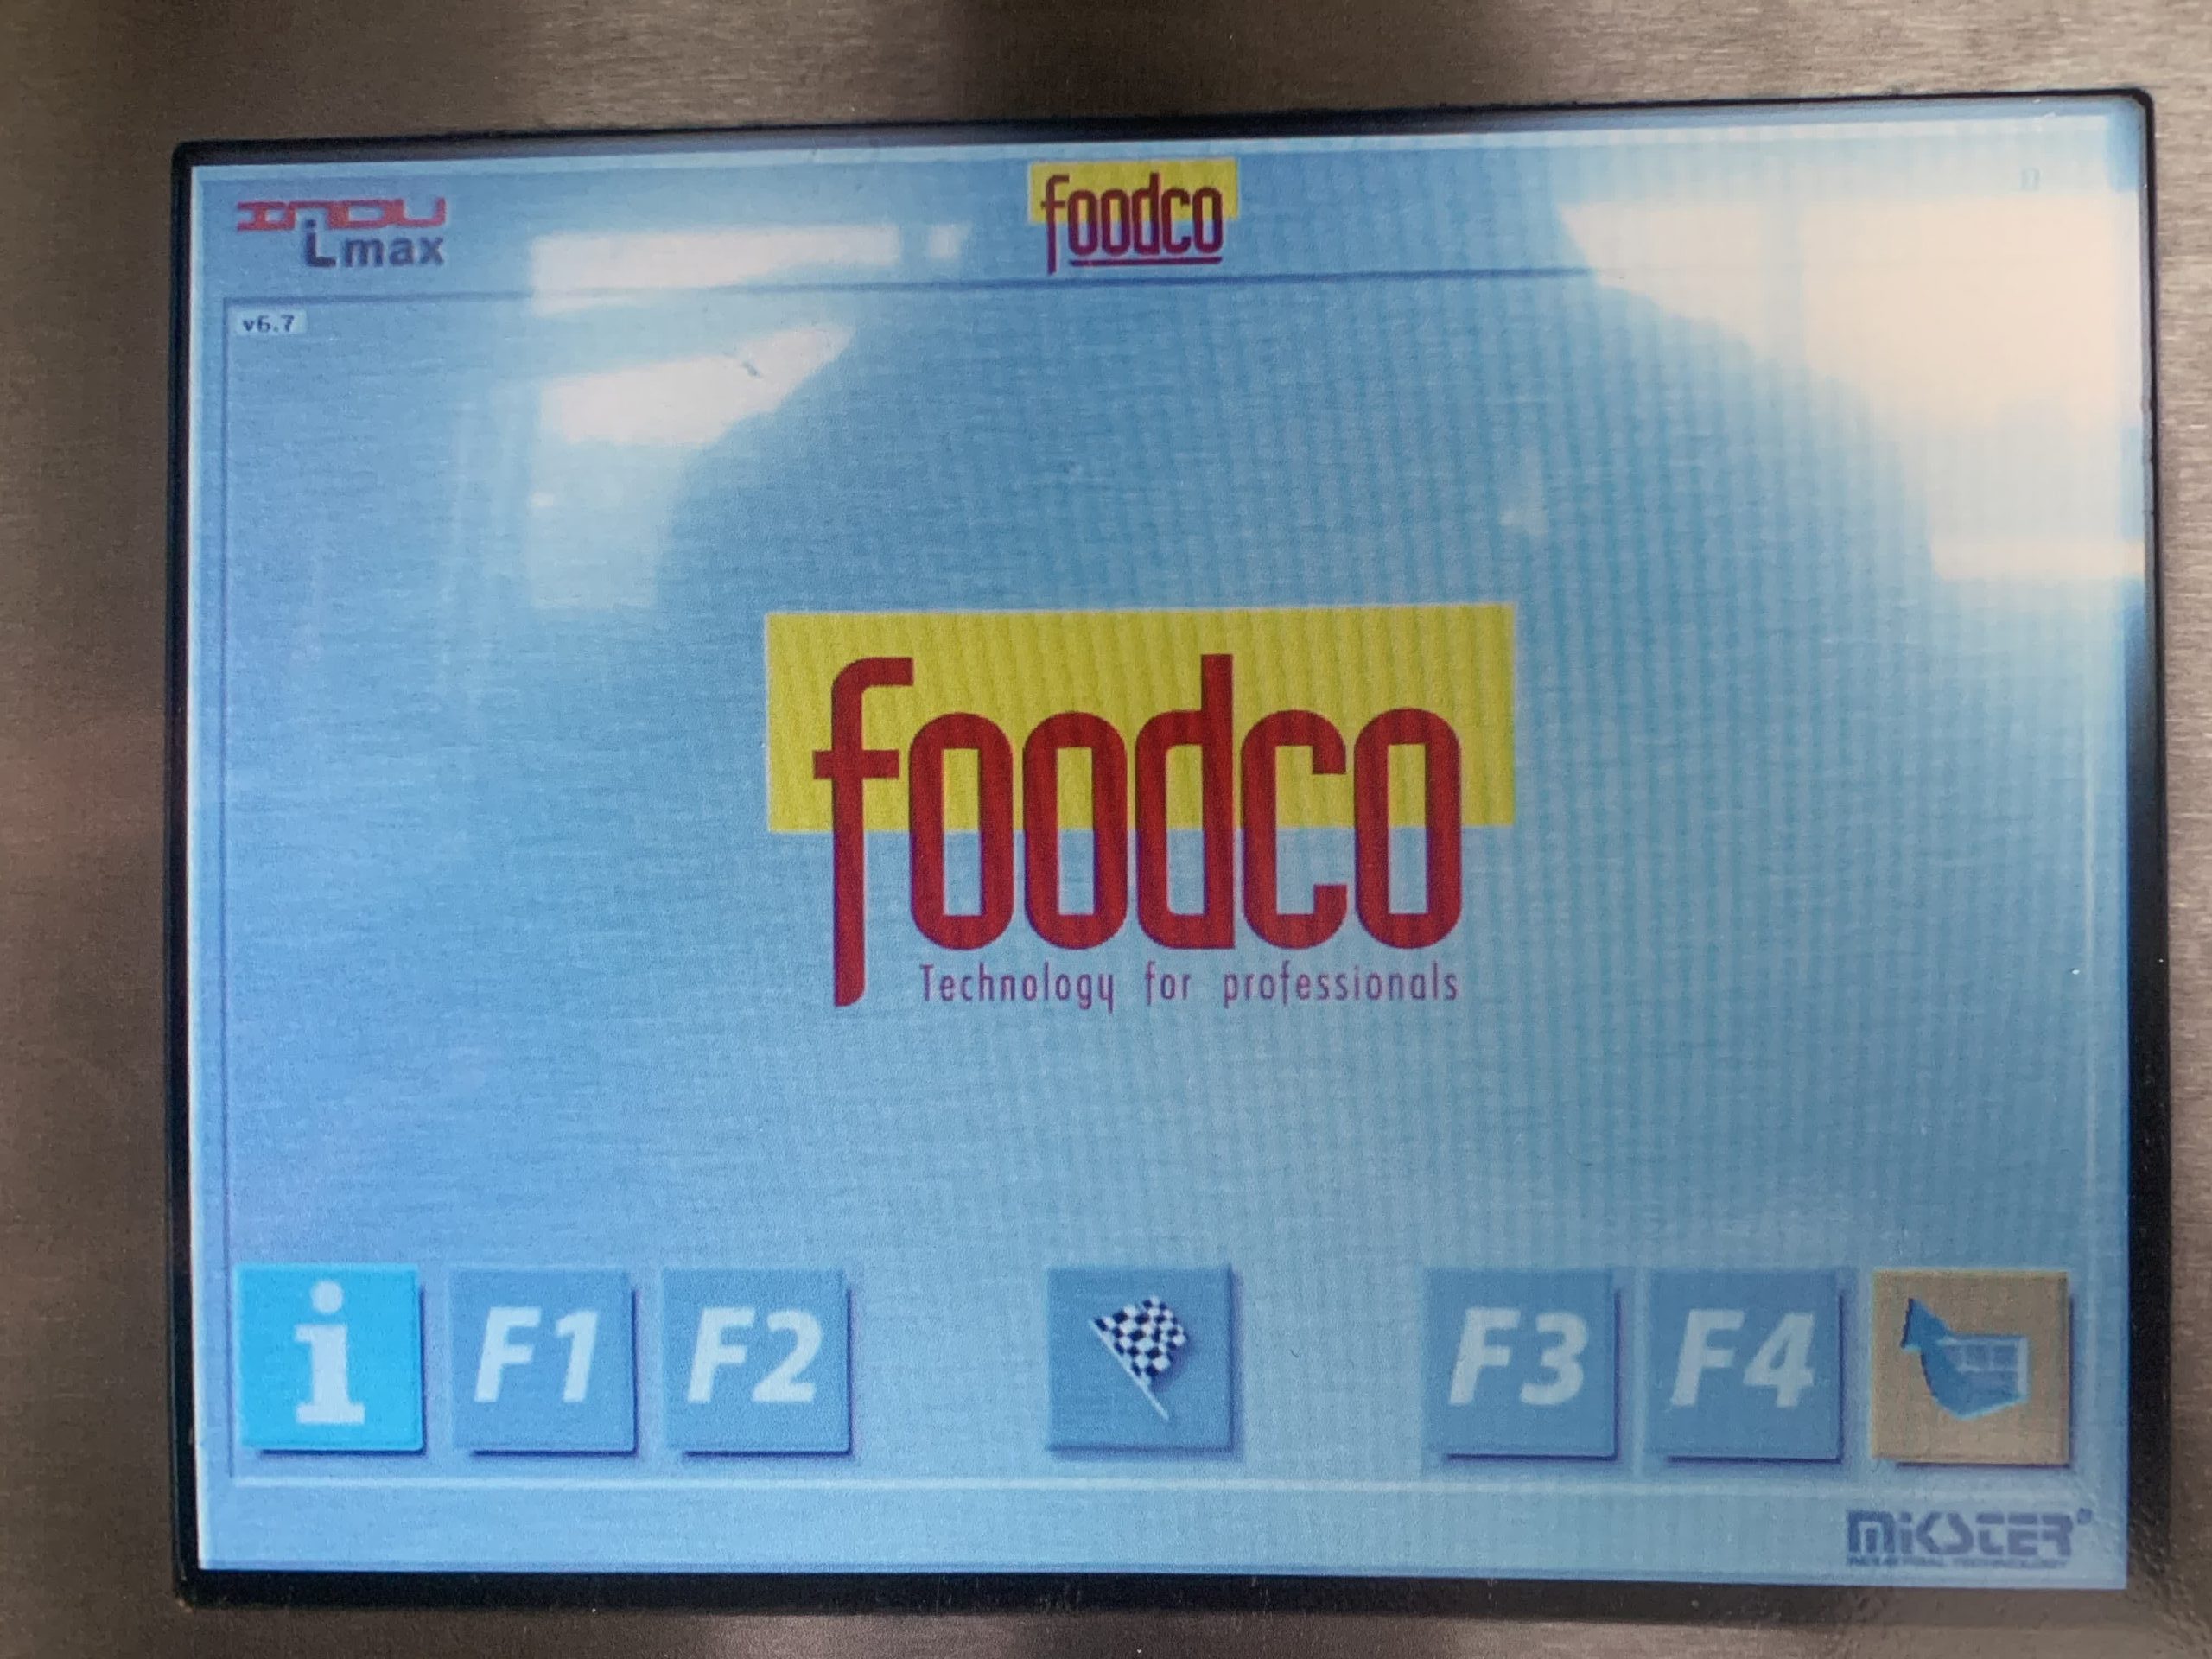 Foodco Global Machinery - Food processing controller Systems iMAX 500 - iMAX 1000 - PLC